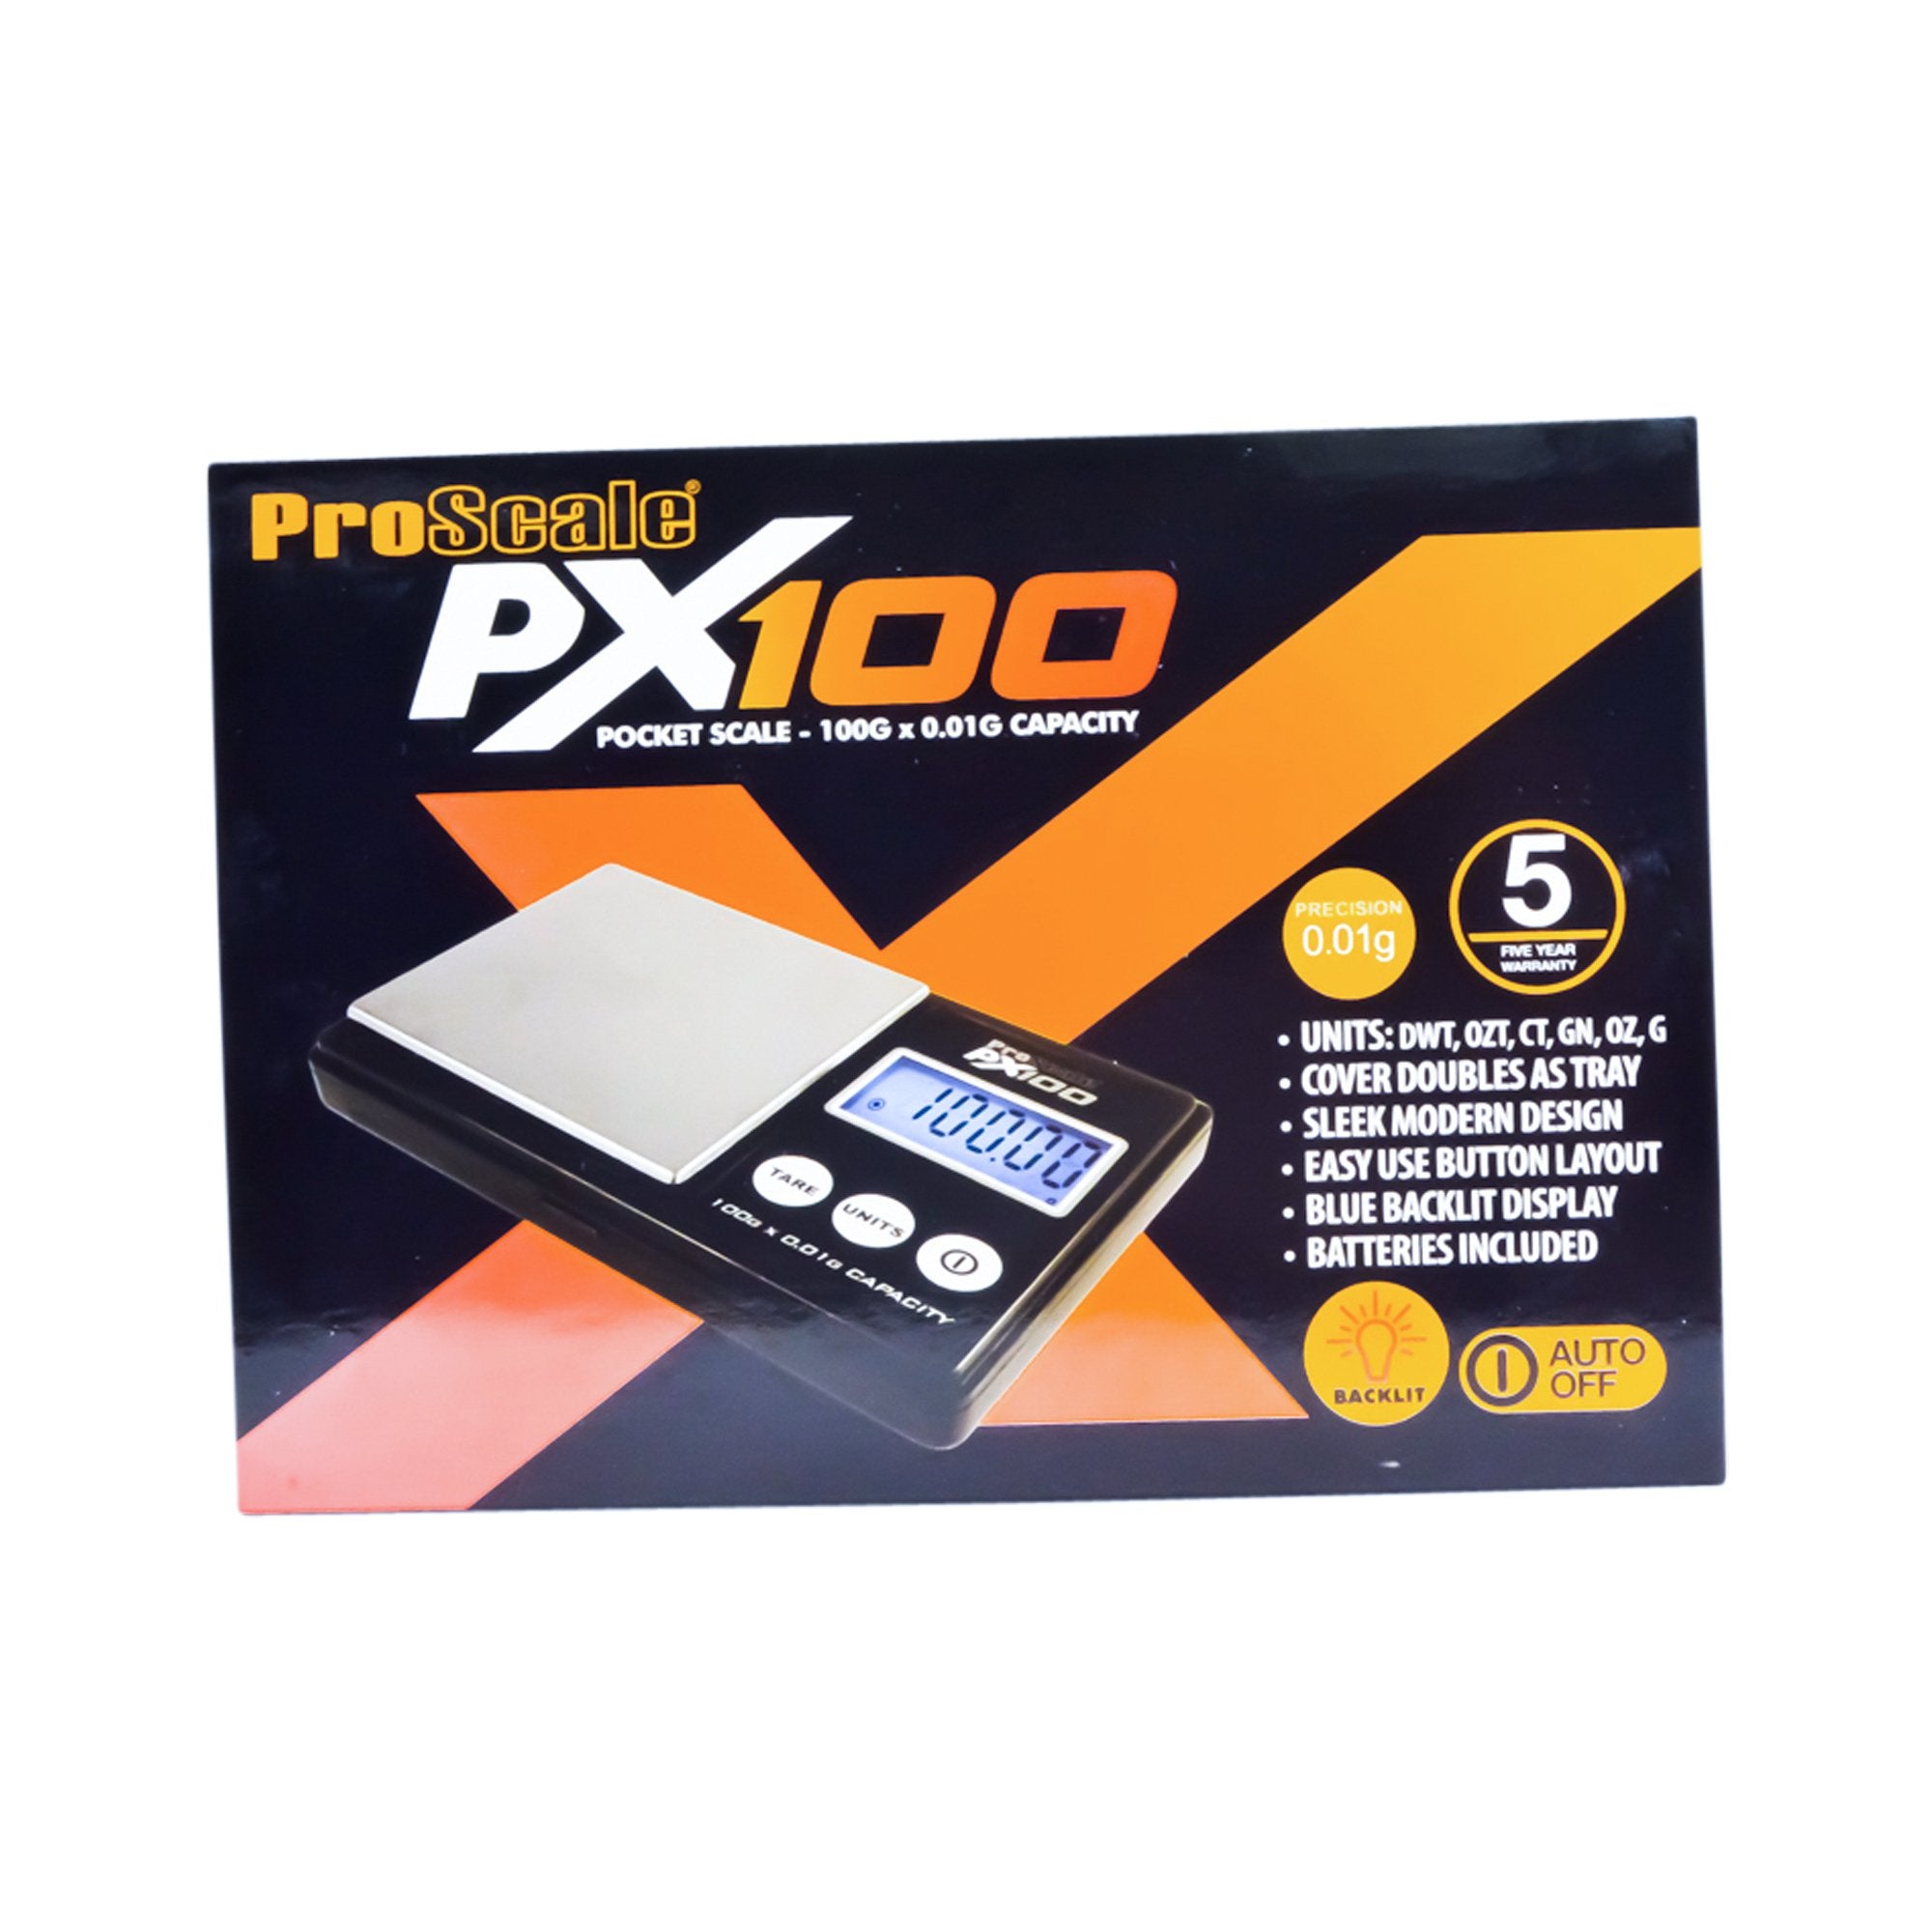 PRO SCALE | PX100 Digital Scale | 100g Capacity - 0.01g Readability - 4